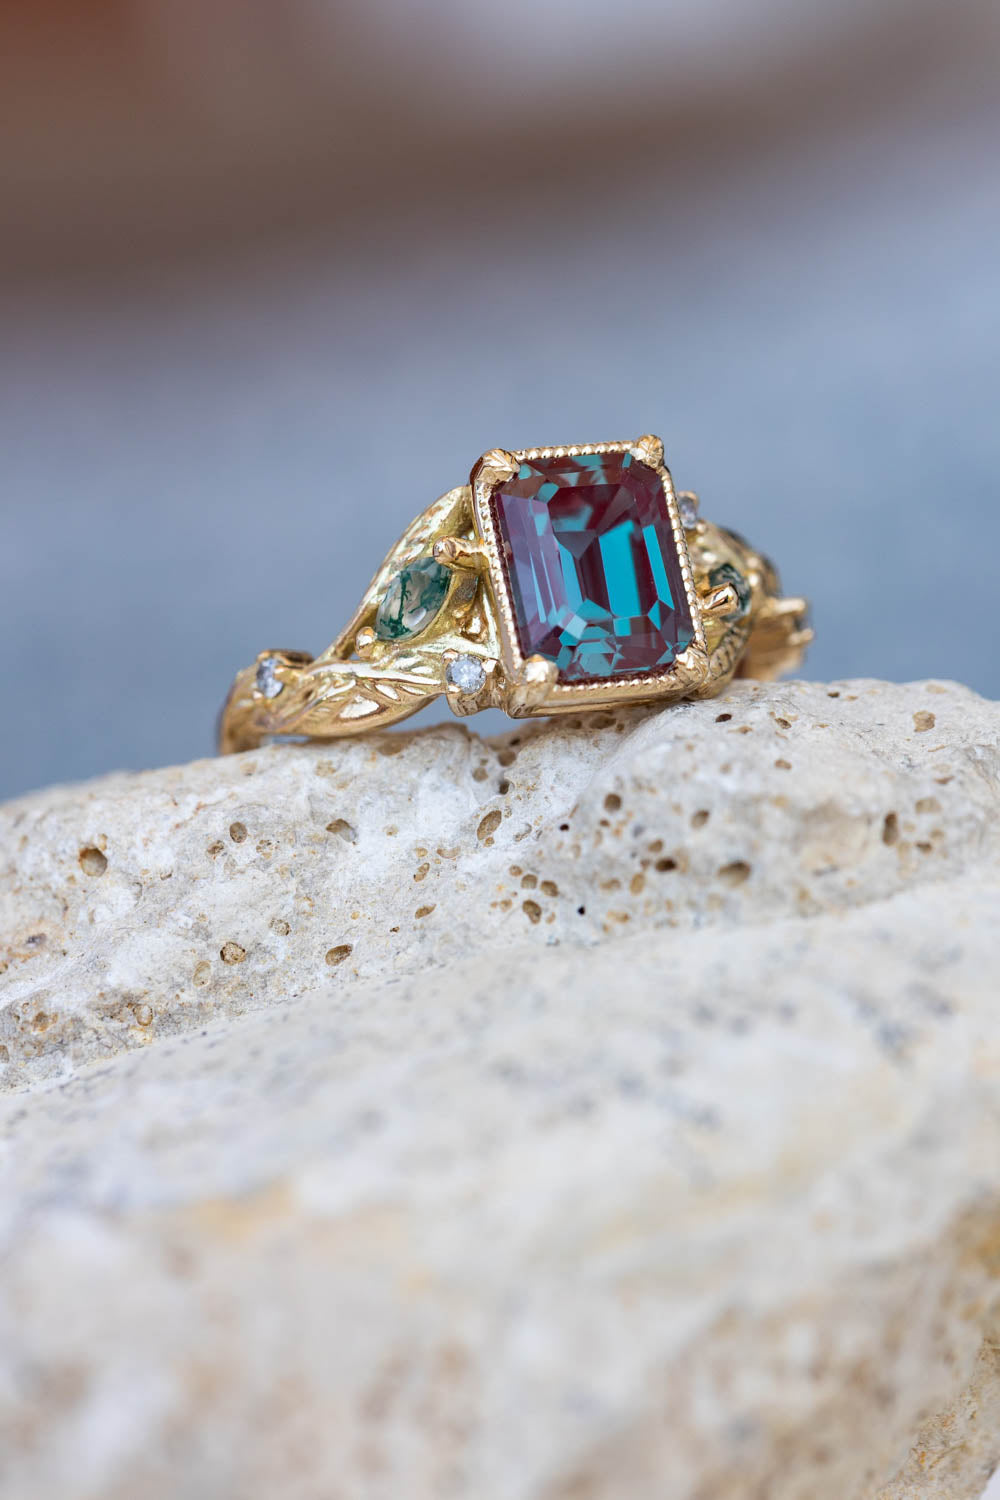 READY TO SHIP: Patricia ring in 14K yellow gold, lab alexandrite emerald cut 8x6 mm, accent moss agates and salt&pepper diamonds, AVAILABLE RING SIZES: 6-8US - Eden Garden Jewelry™